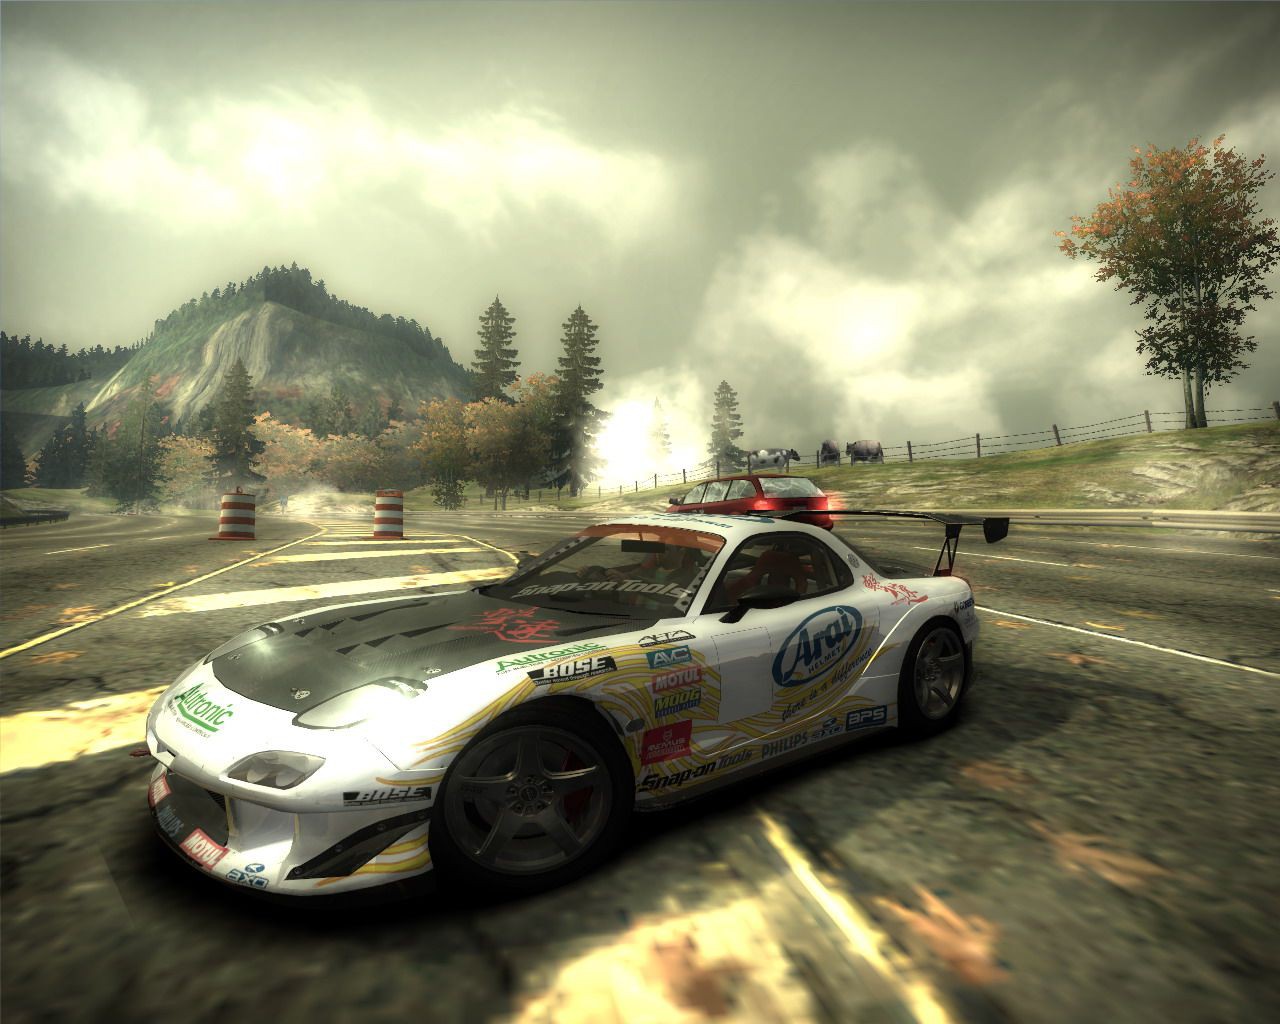 Nfs mods cars. NFS MW Mazda RX 7. Mazda rx7 MW 2005. Mazda RX-7 из нфс 2005. Need for Speed mostwanted 2005.